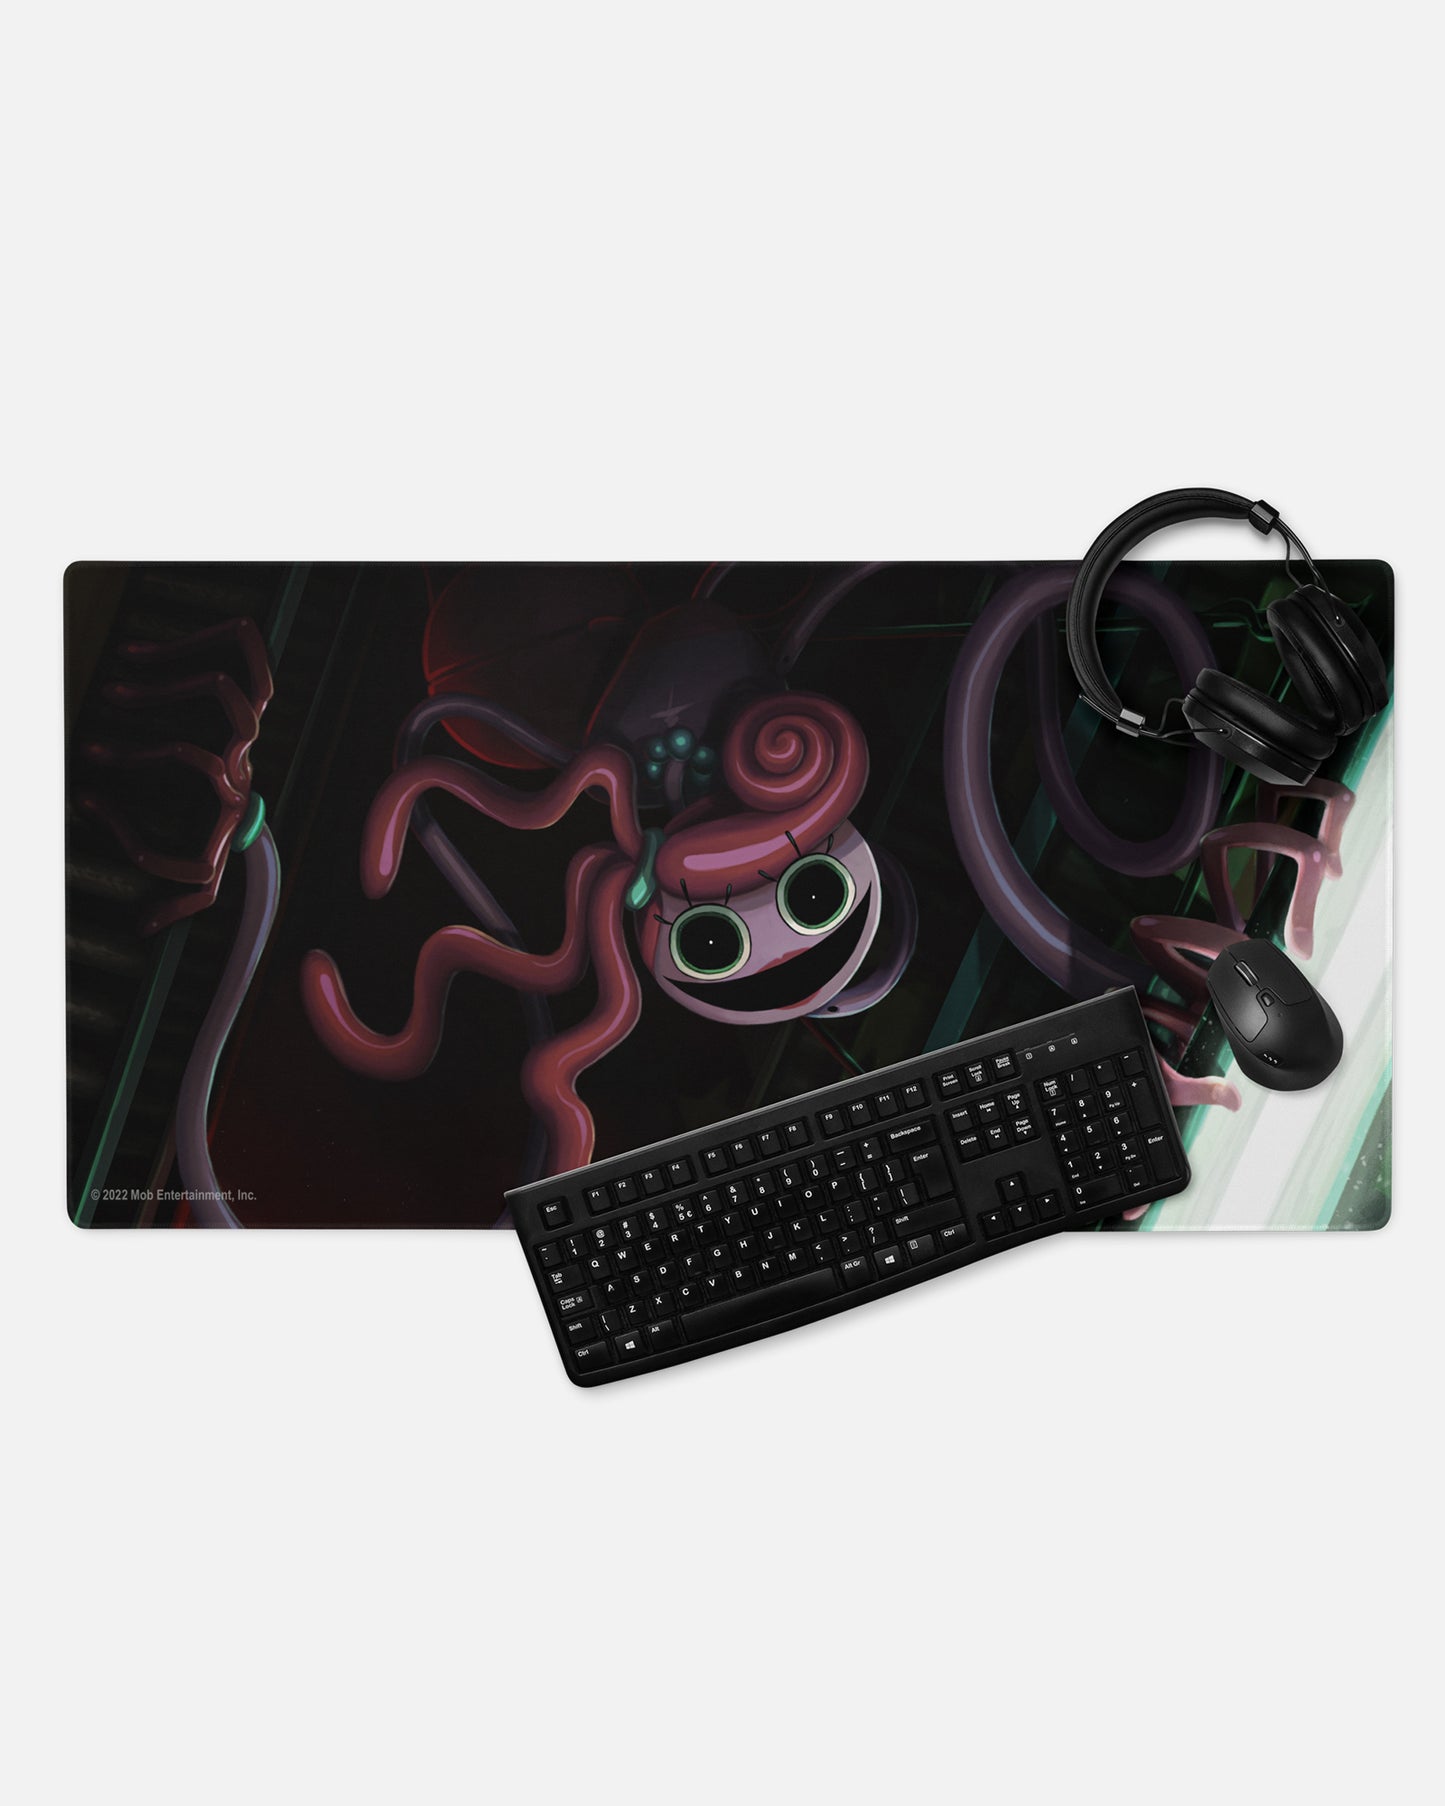 mommy longlegs gamer mousepad with headphones, keyboard, and mouse to show example of gaming set up. image: scary mommy longlegs crawling down grabbing light.